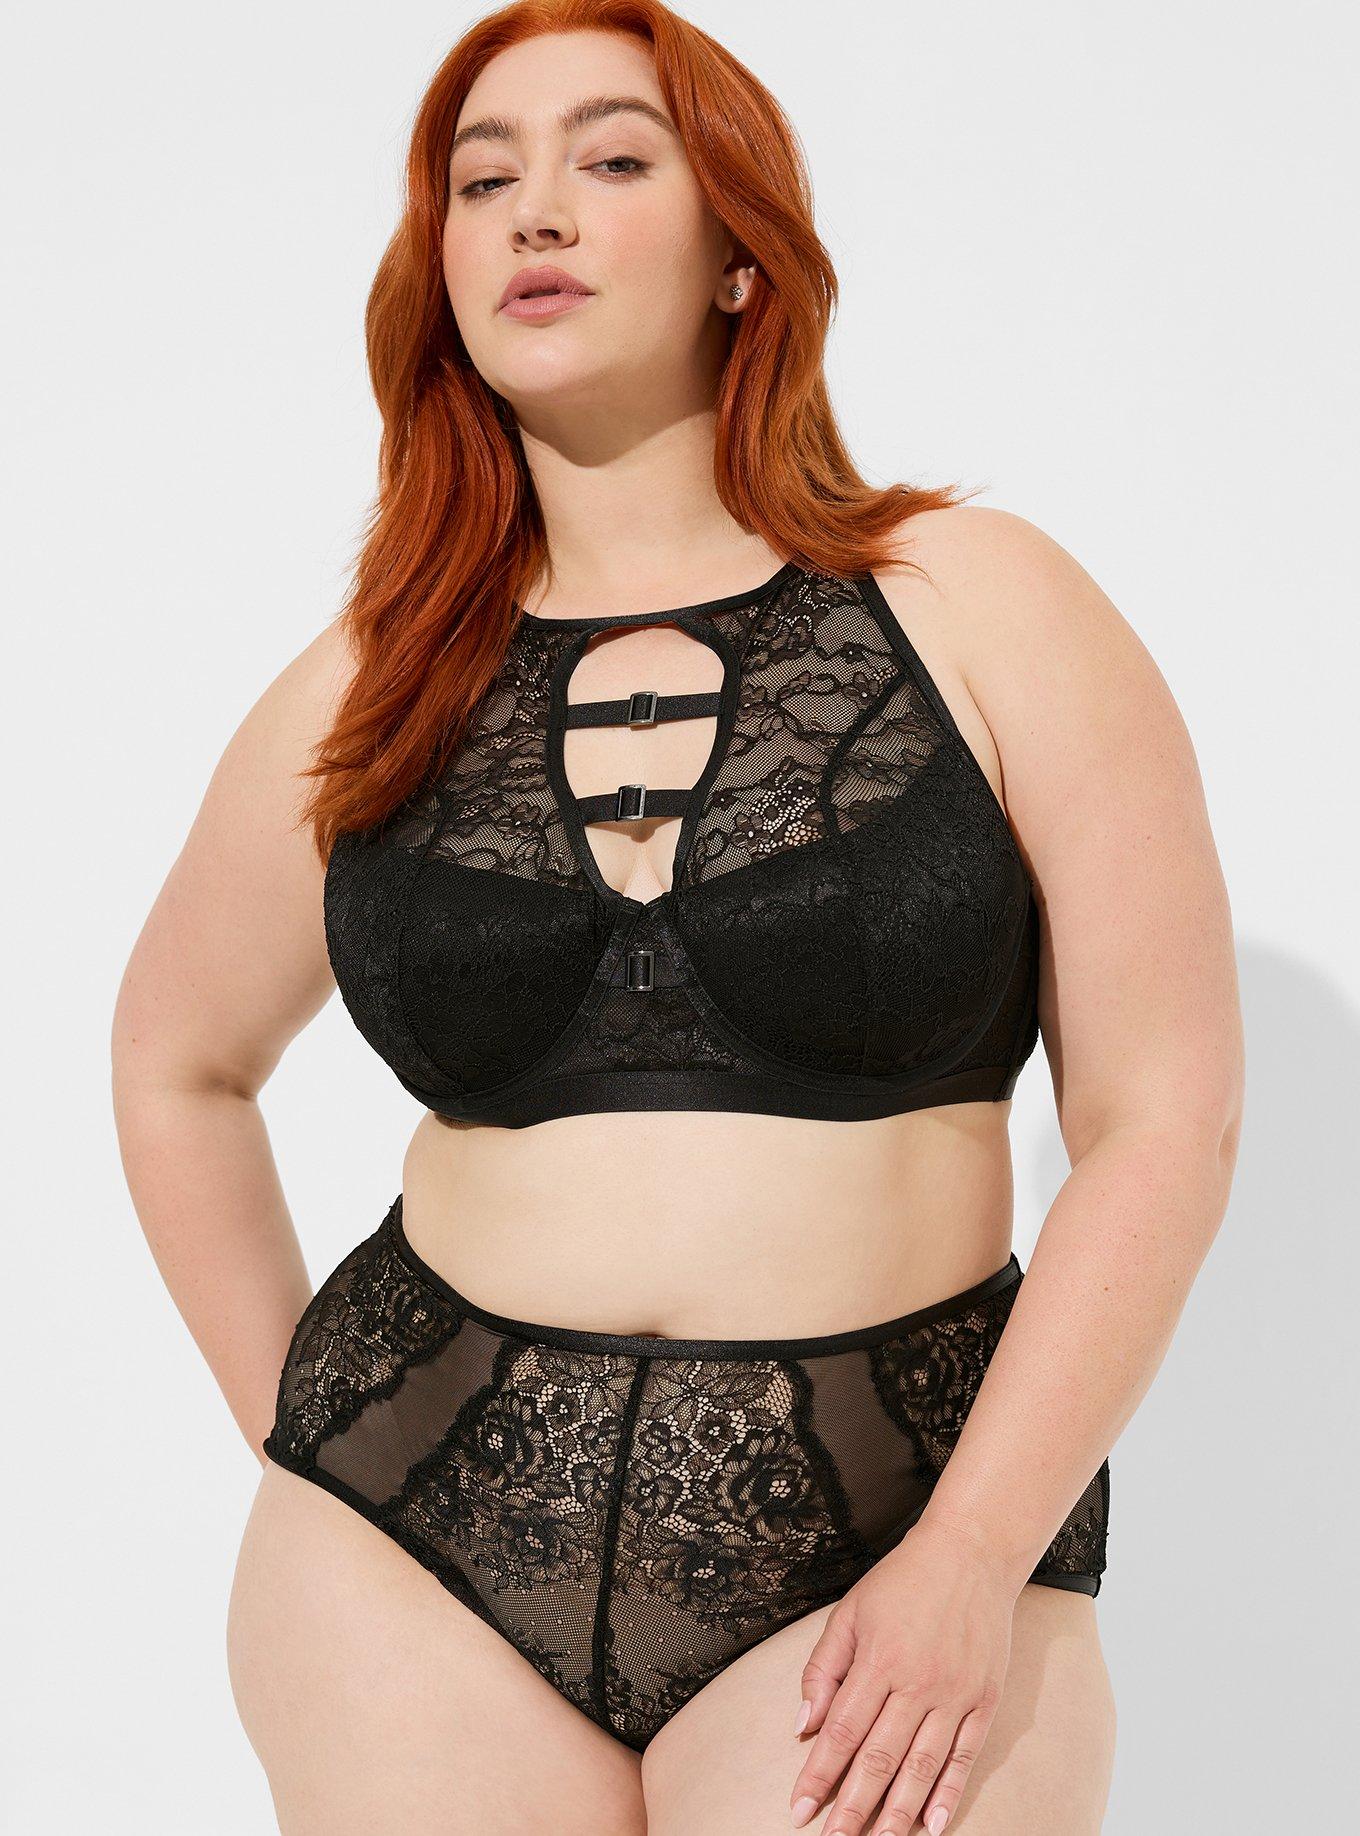 Torrid Lace High-Rise Cheeky Panty - 10630466